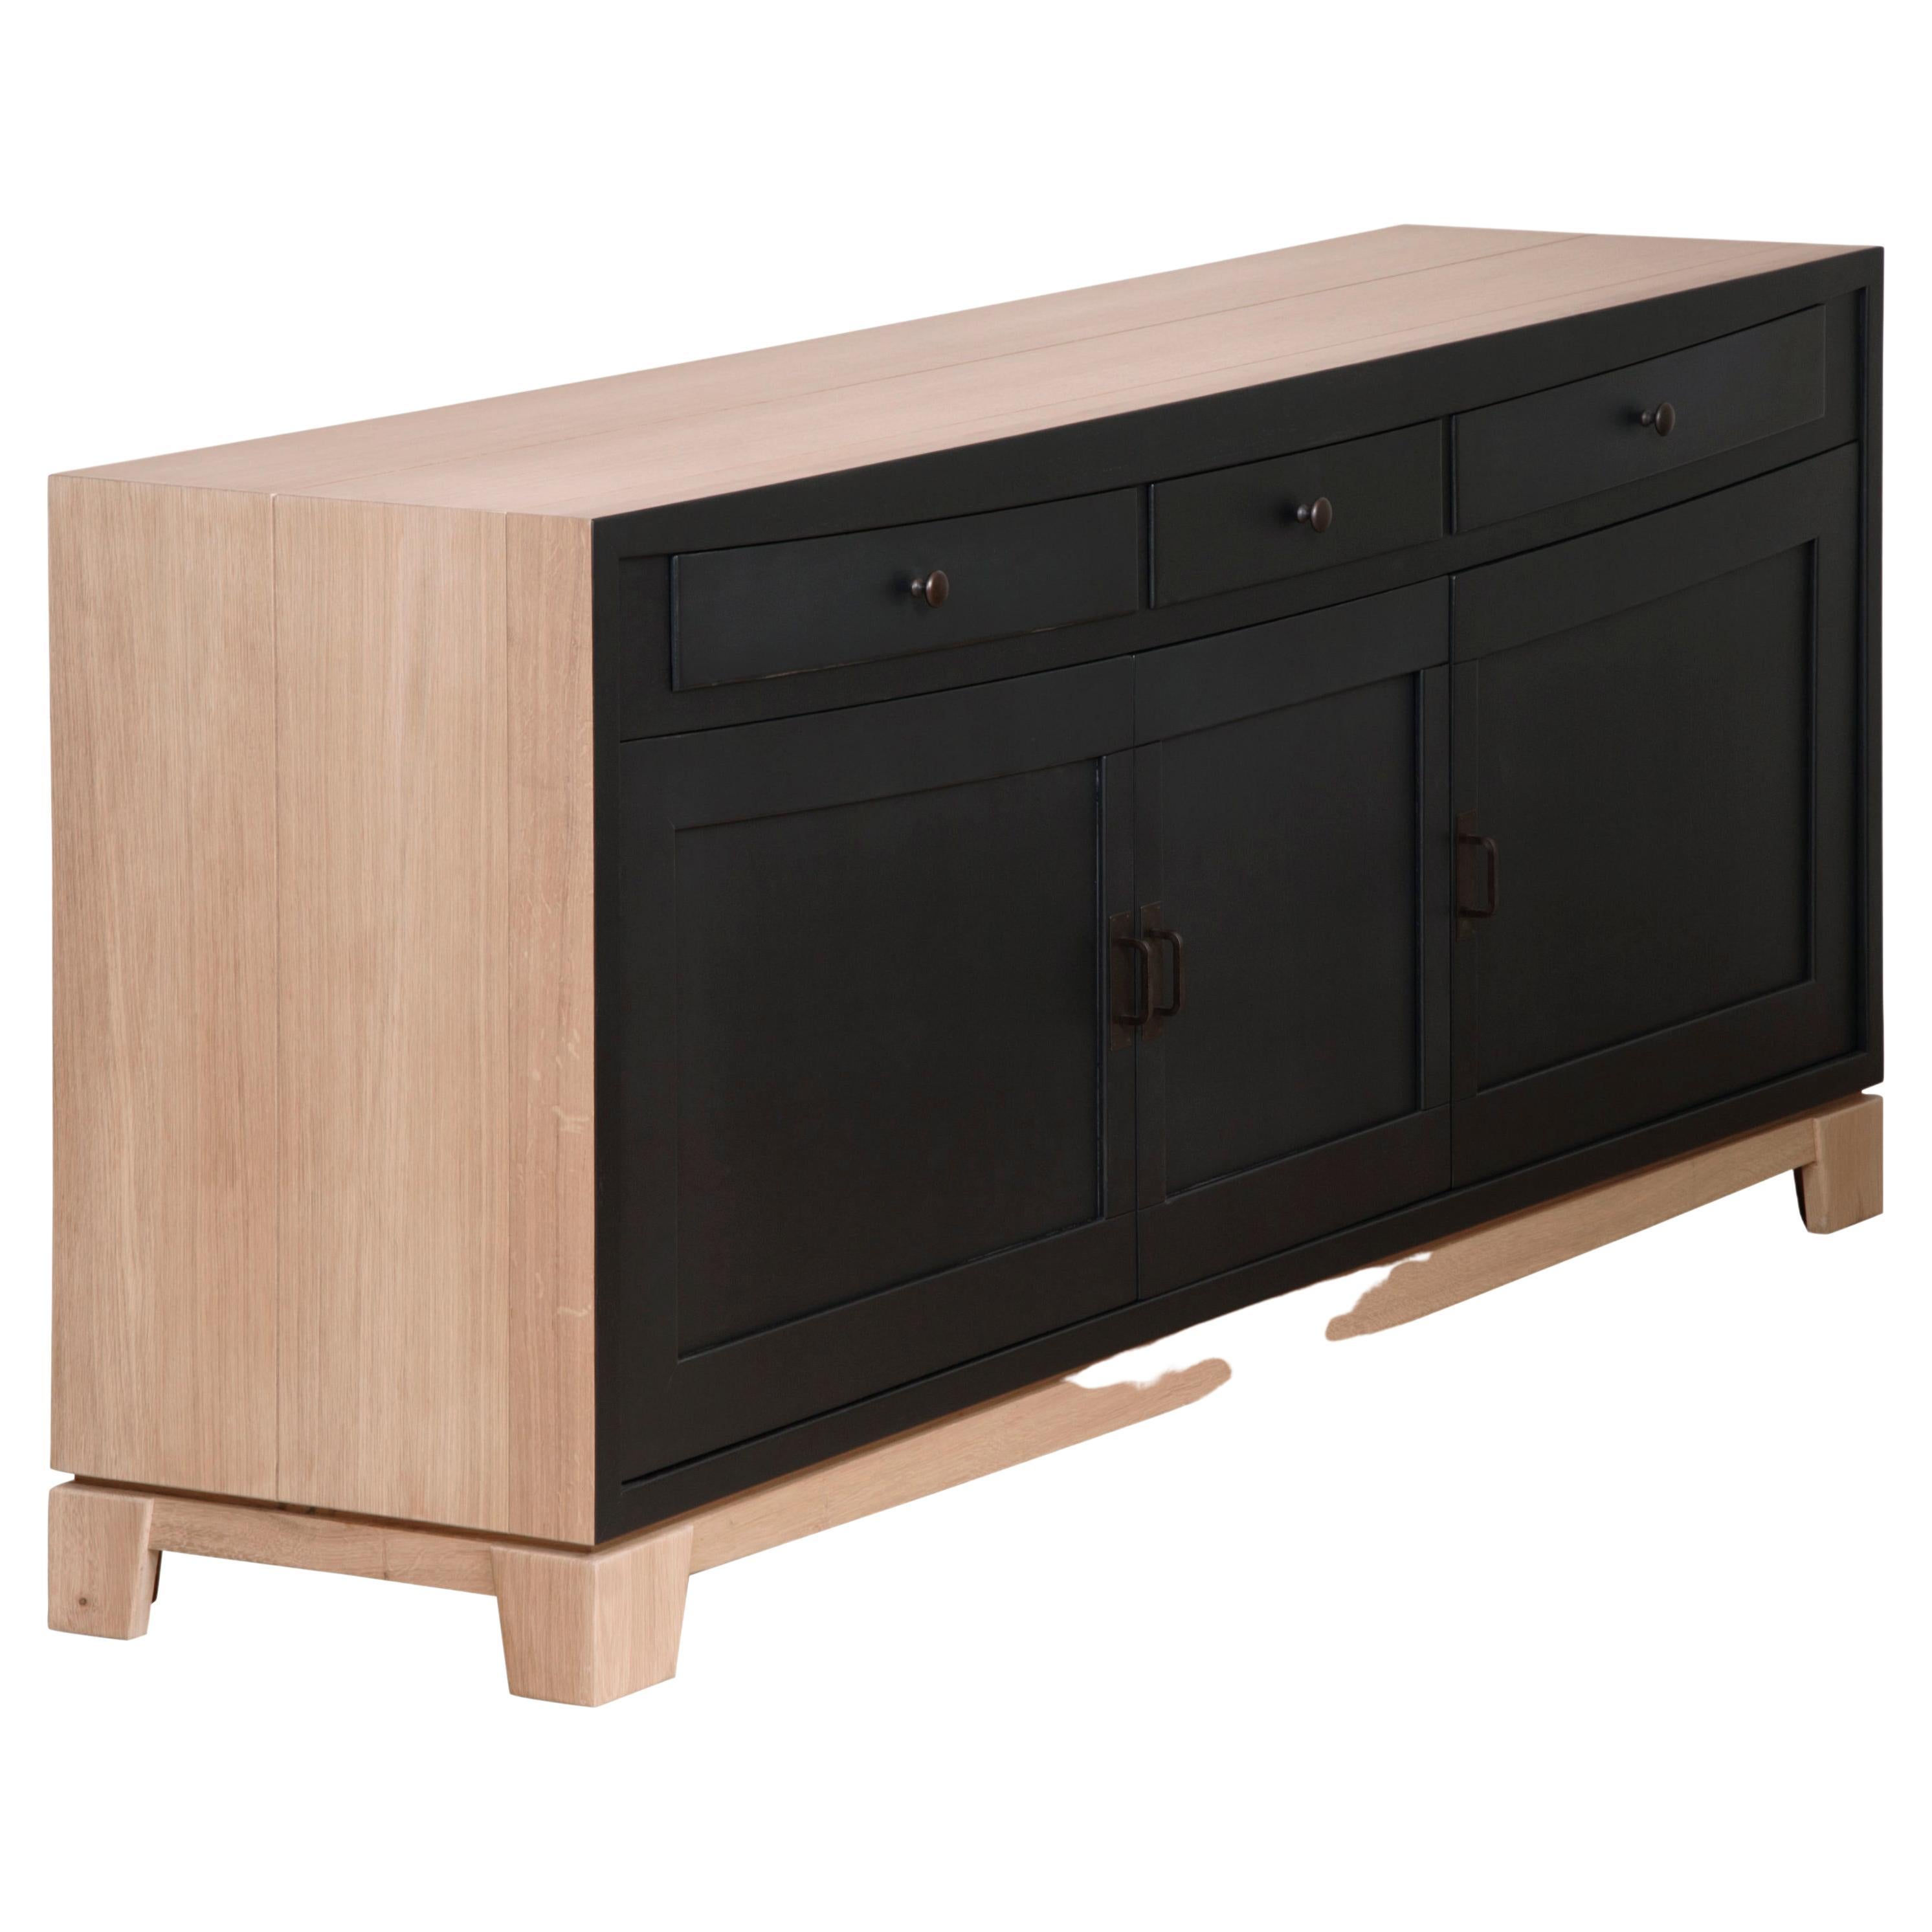 This 3 doors sideboard belongs to the SIENNA collection and was created by the French designer Christophe Lecomte. Christophe uses oak, as a French noble wood to enforce the feeling of durability and timeless lines of this collection. The straight